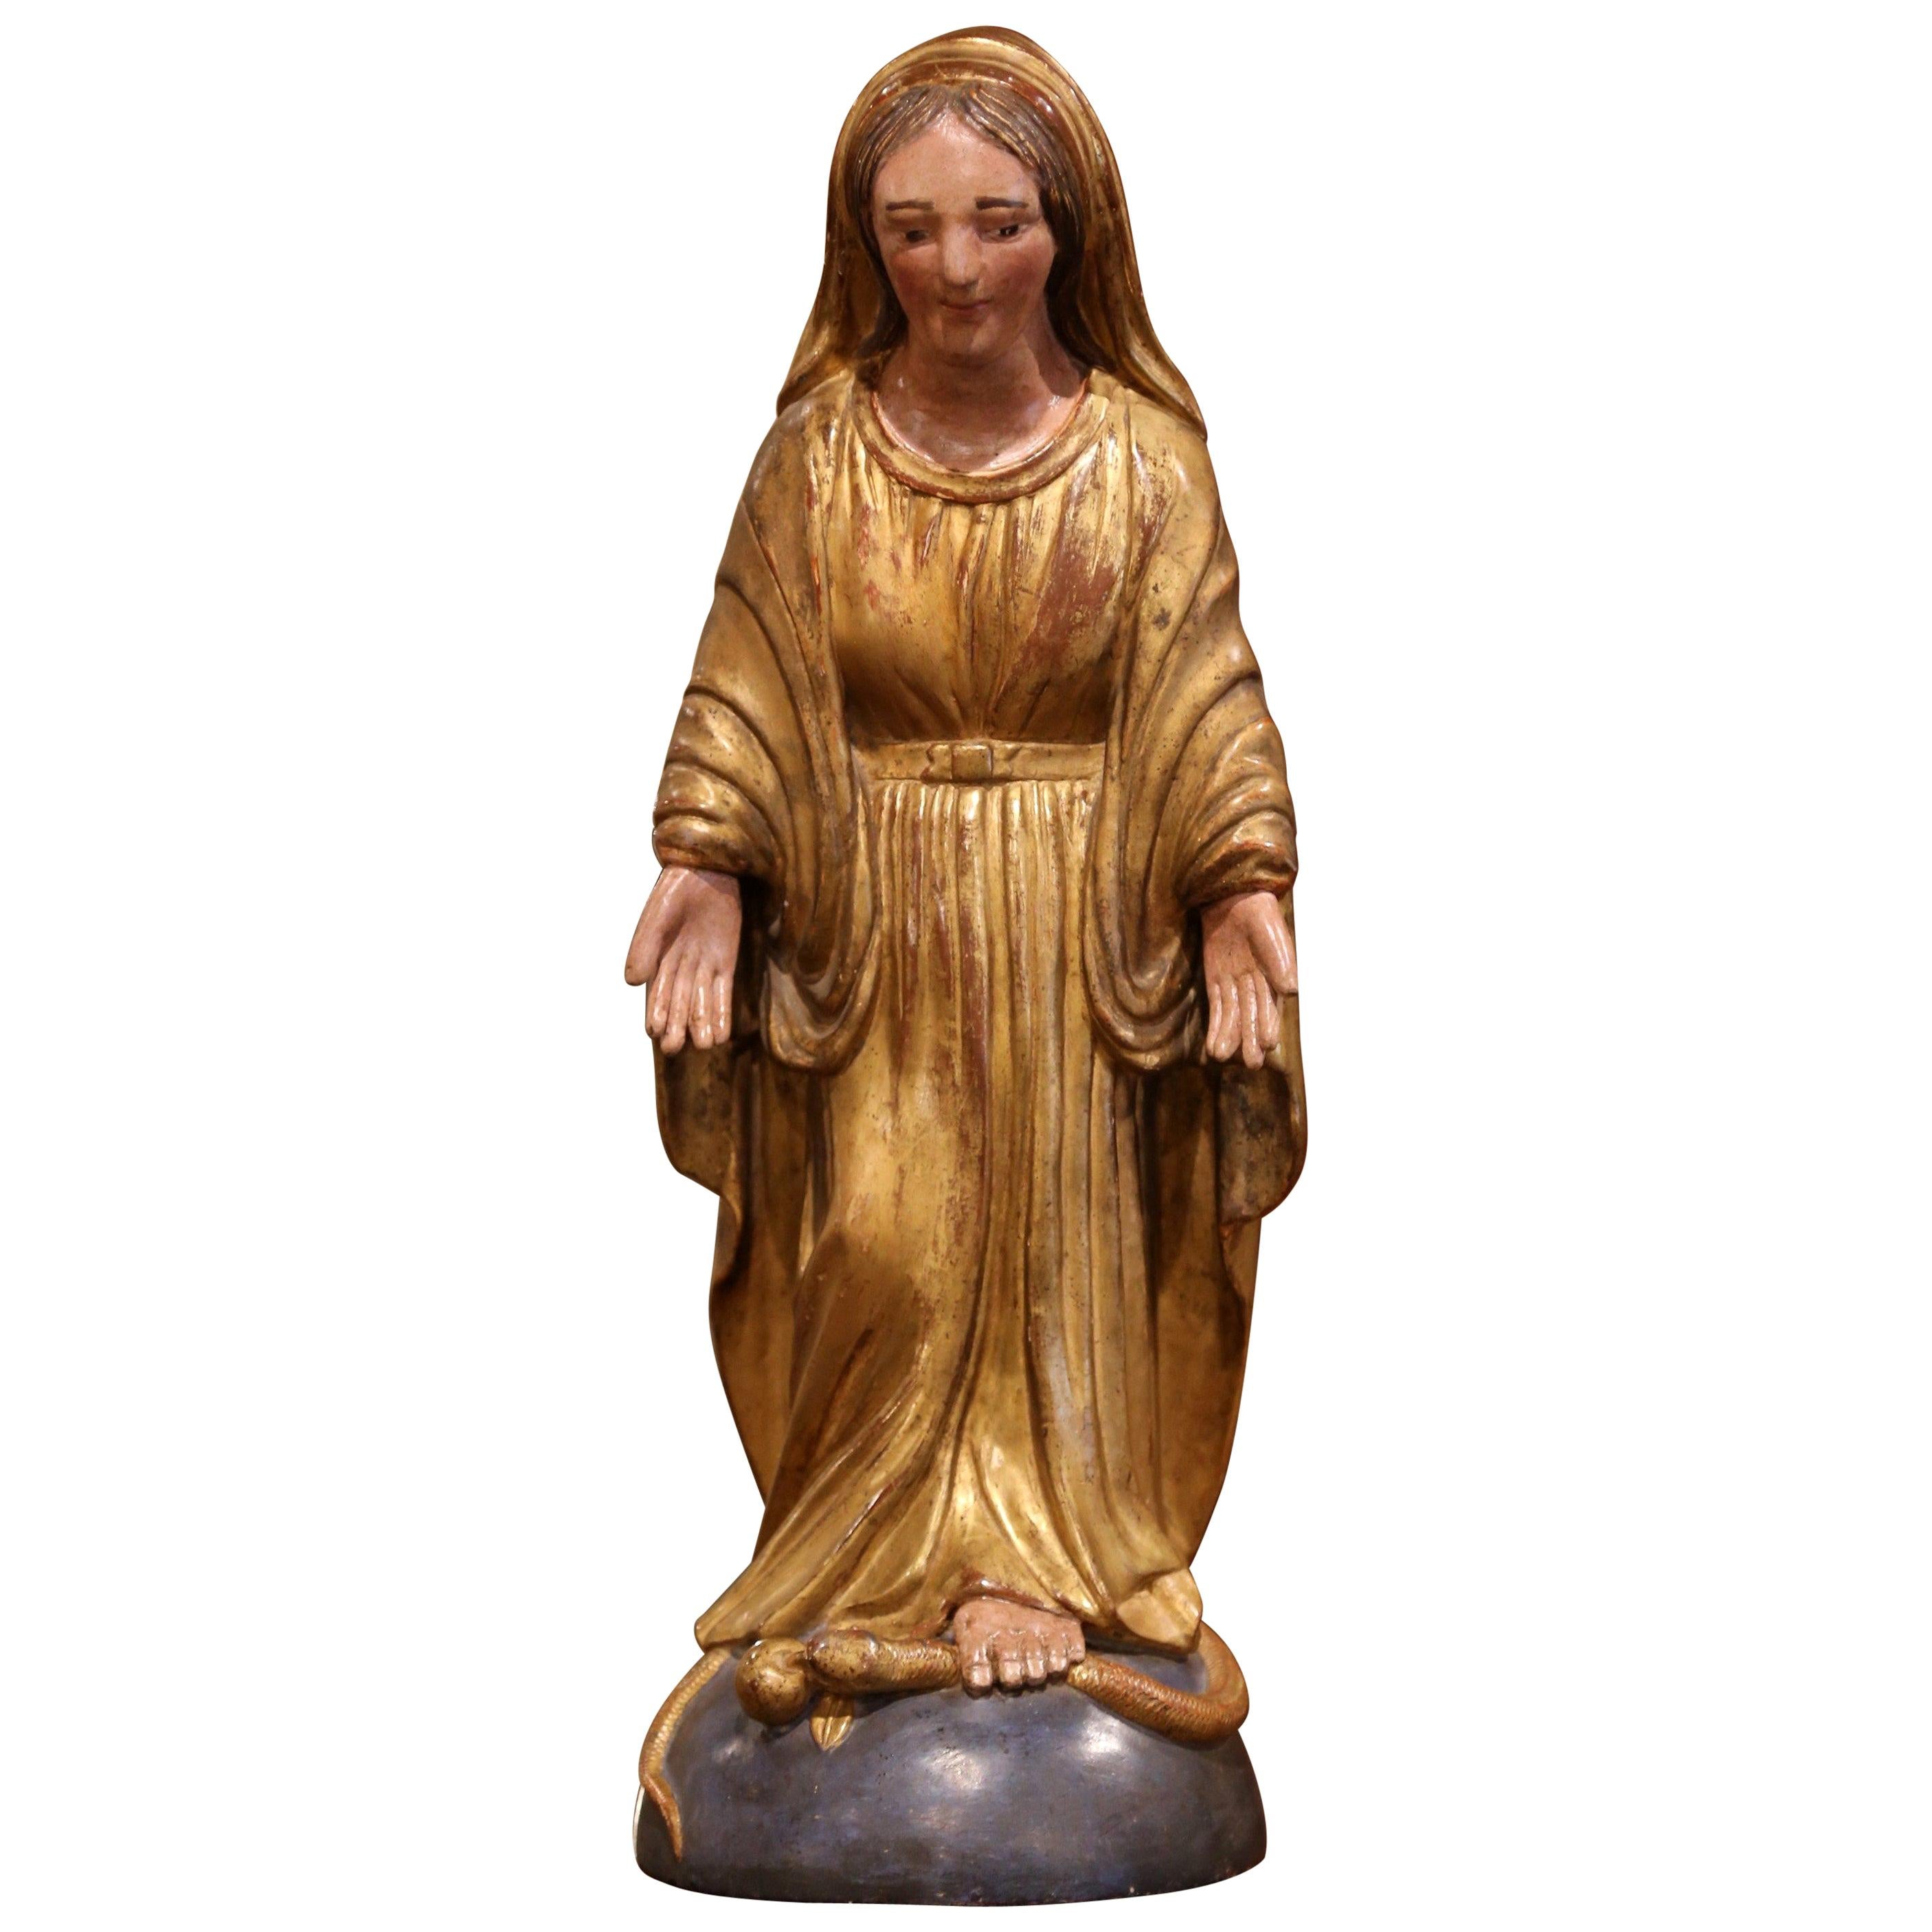 Virgin Mary Statue - 25 For Sale on 1stDibs | virgin mary statue